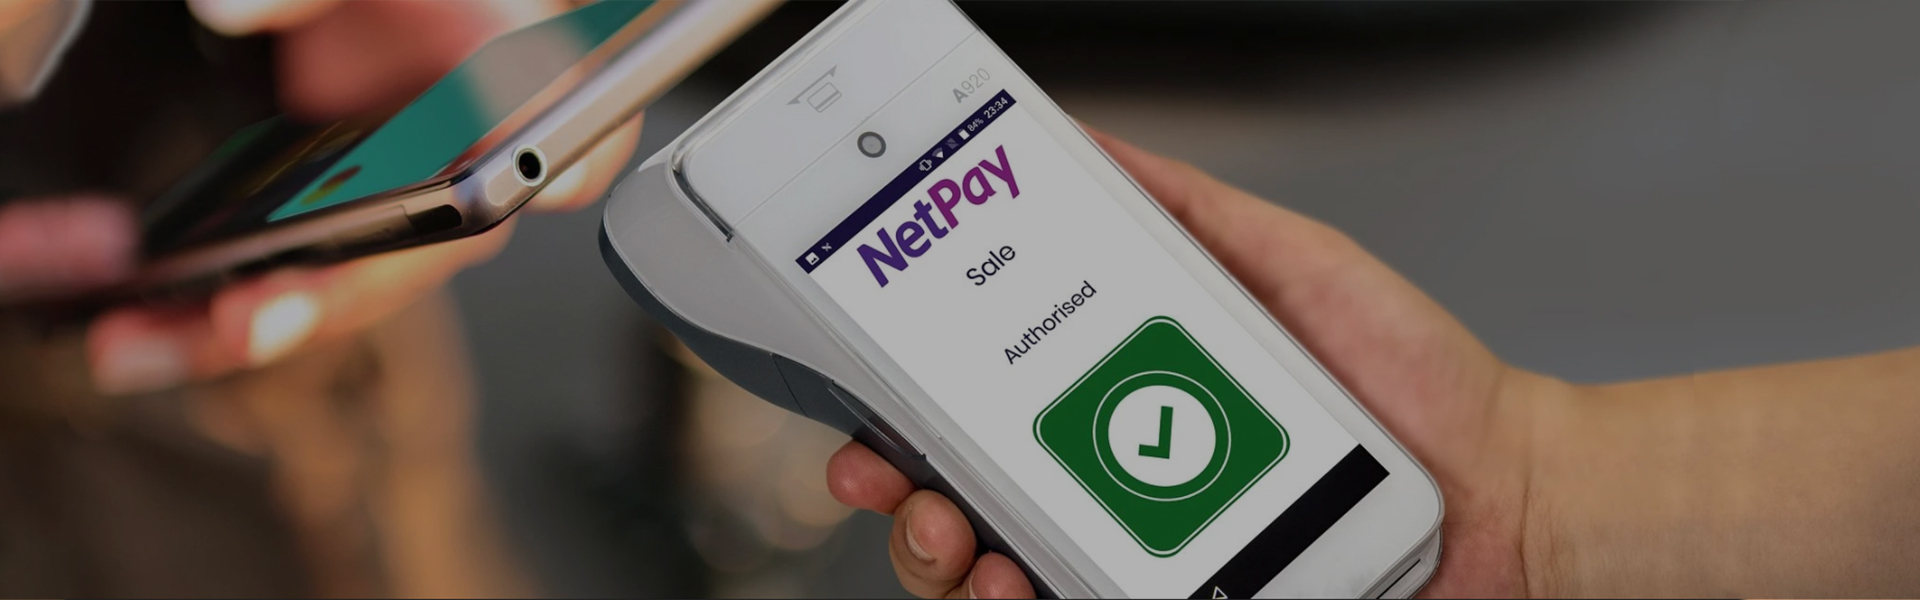 NetPay release Android based smart terminals from PAX Technology